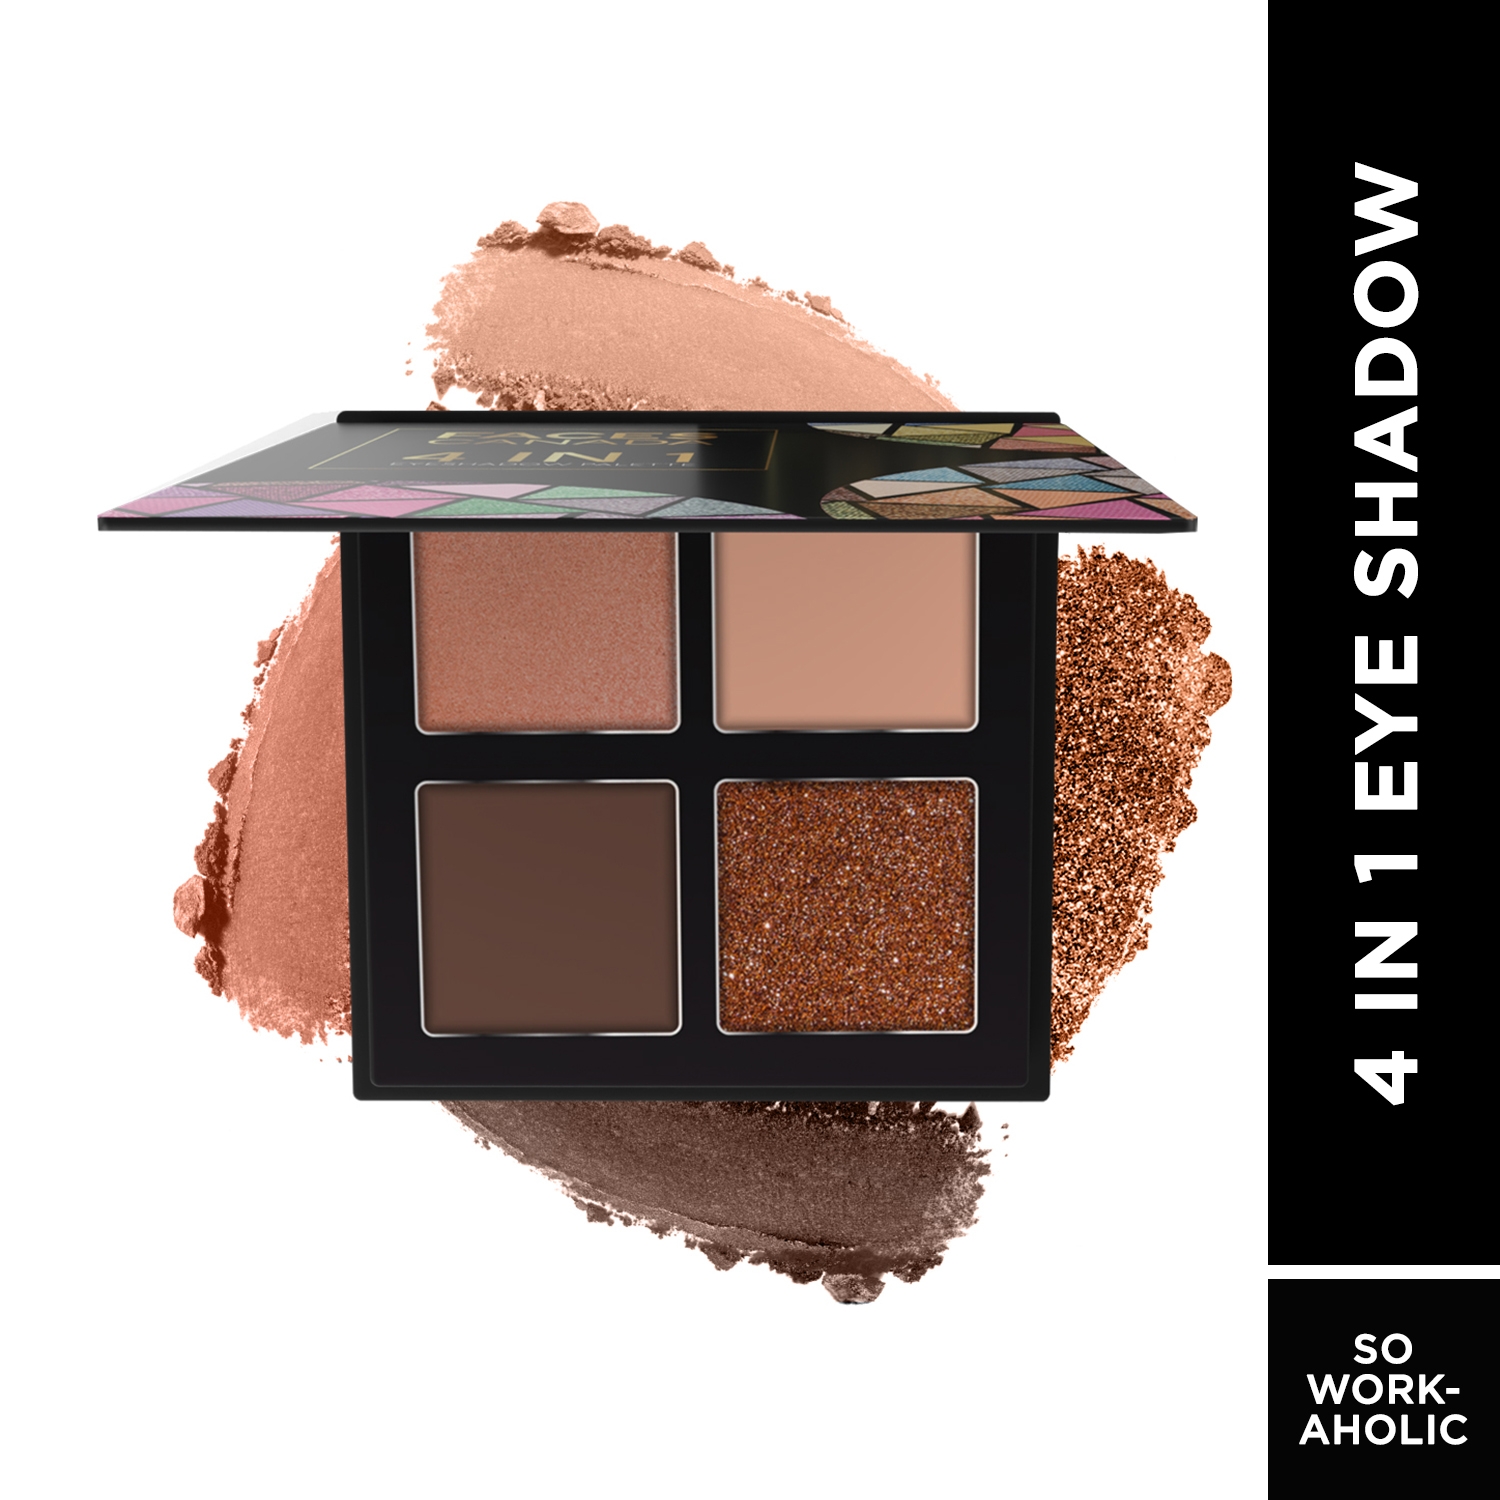 Faces Canada | Faces Canada 4 In 1 Quad Eyeshadow Palette - 02 So Workaholic (5g)